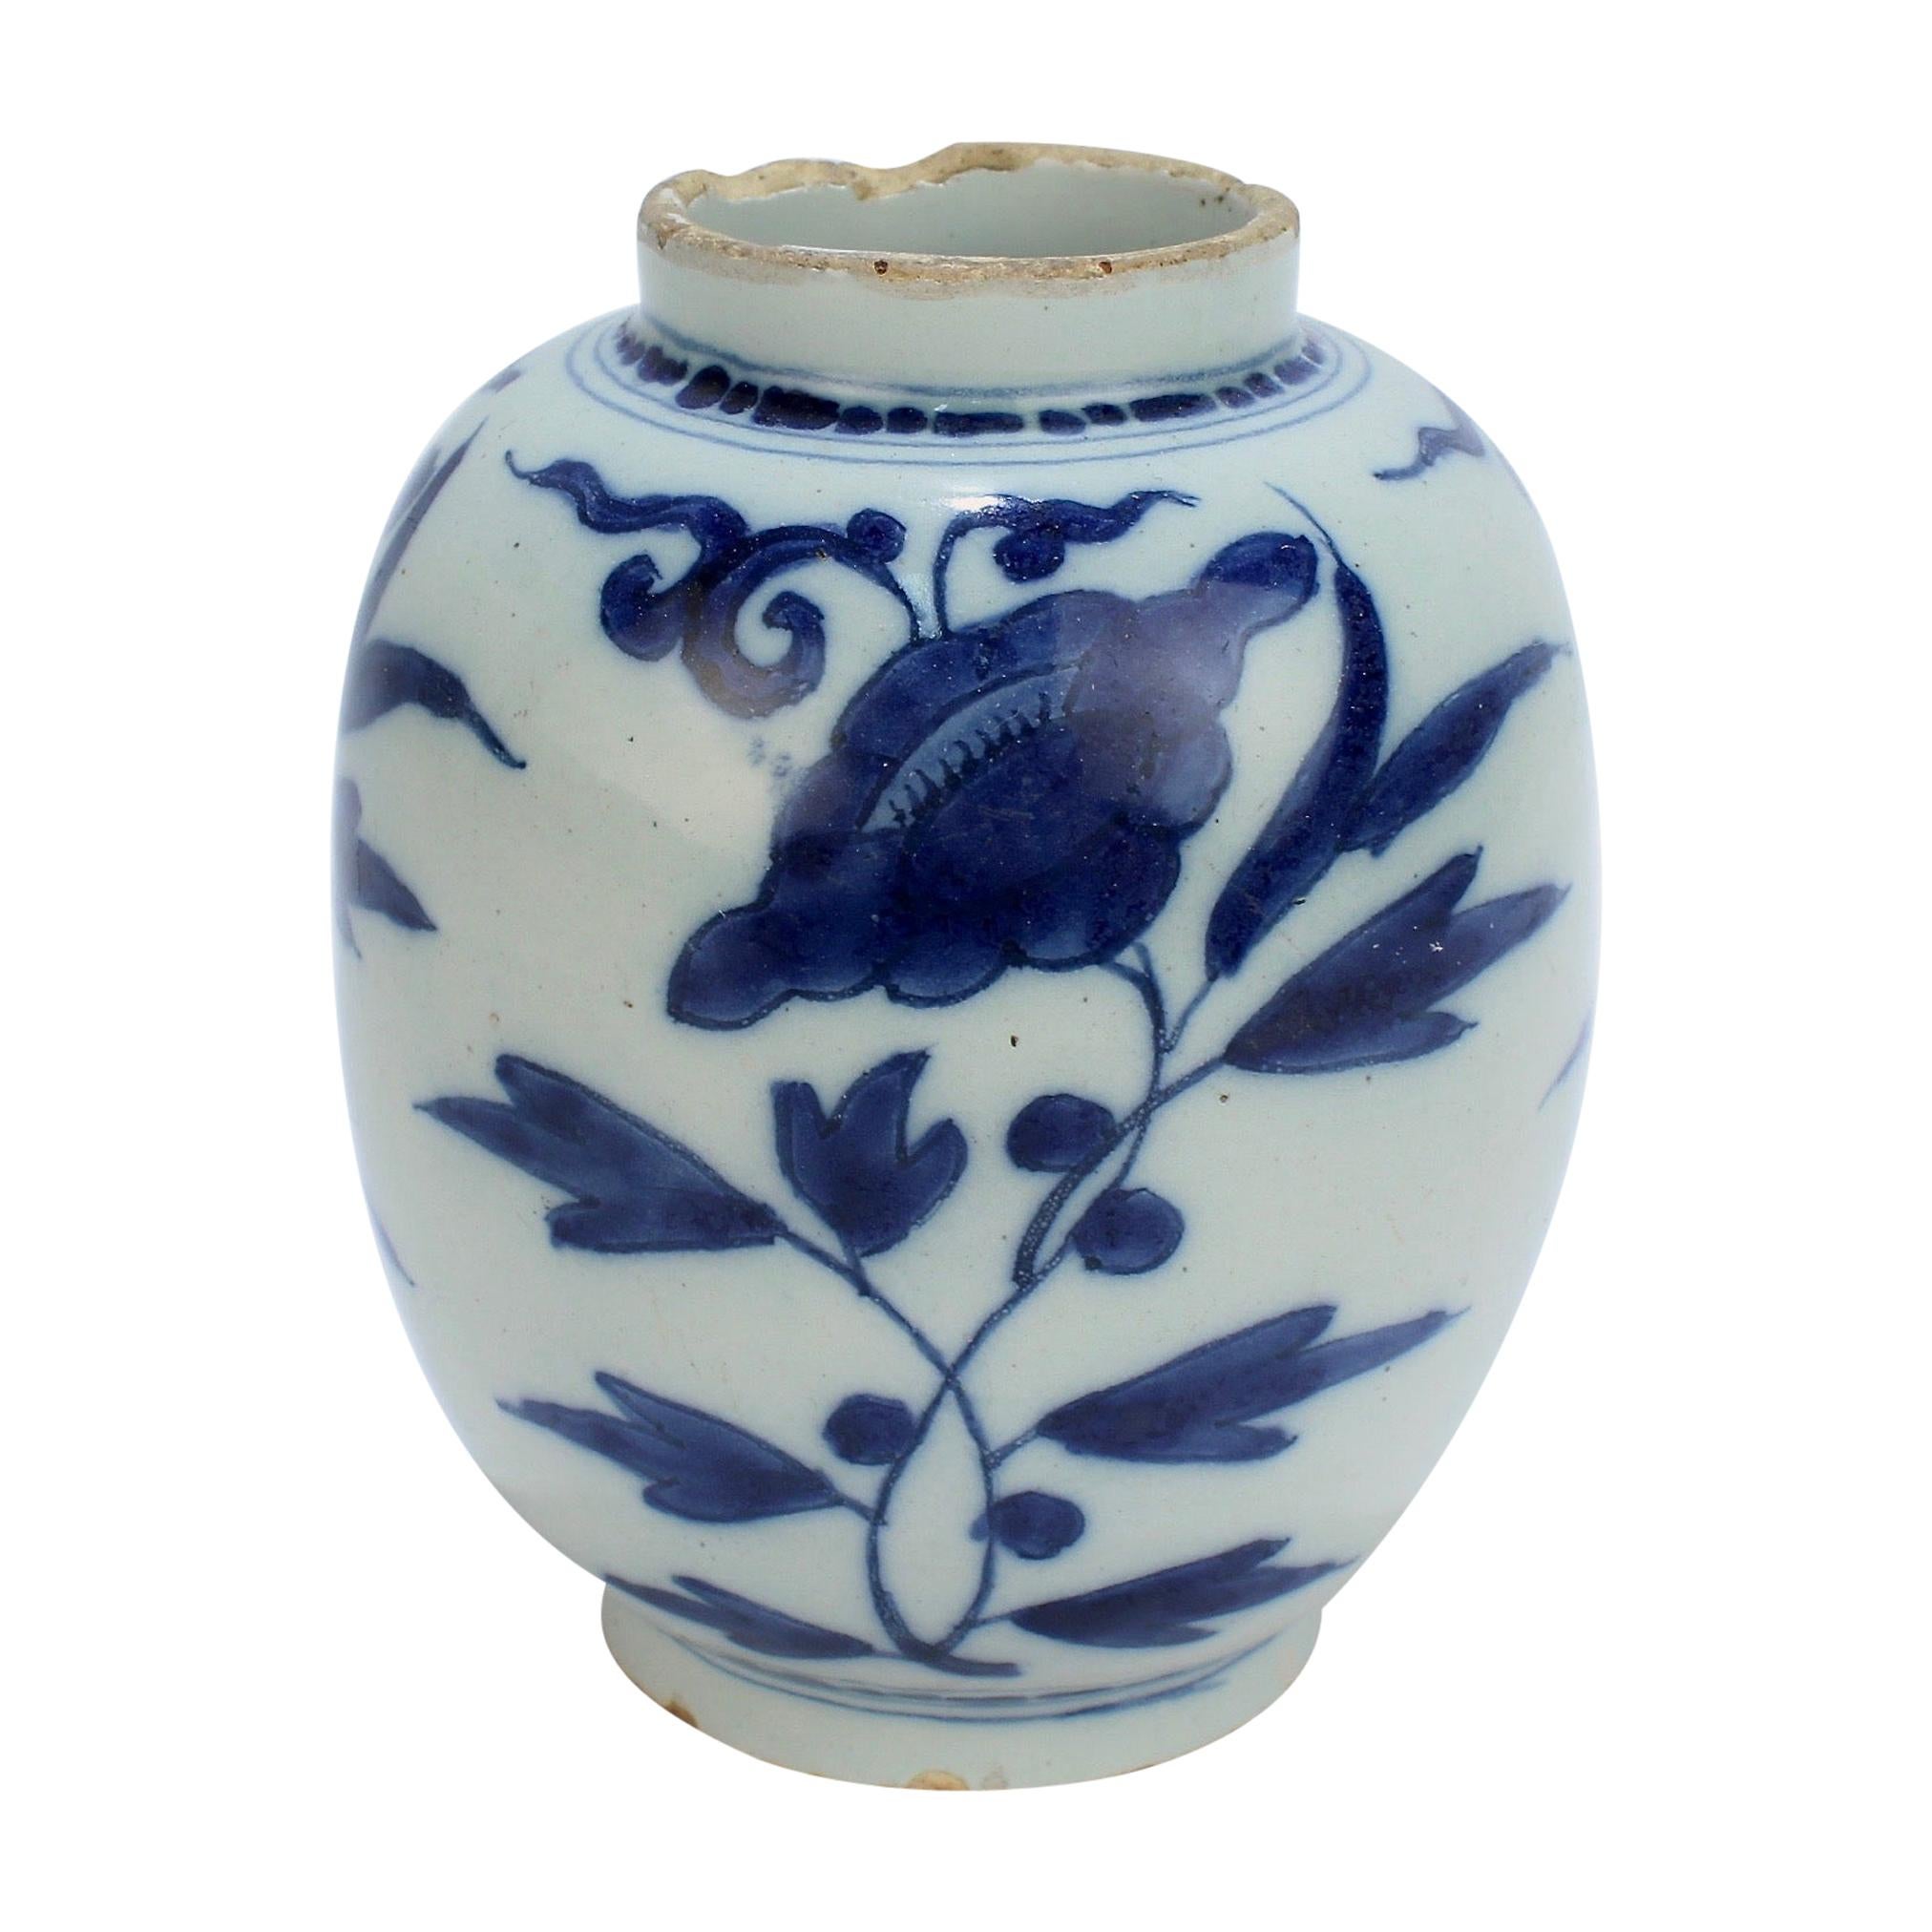 Late 17th-Early 18th Century Dutch Delft Vase or Jar Marked for Gerrit Kam